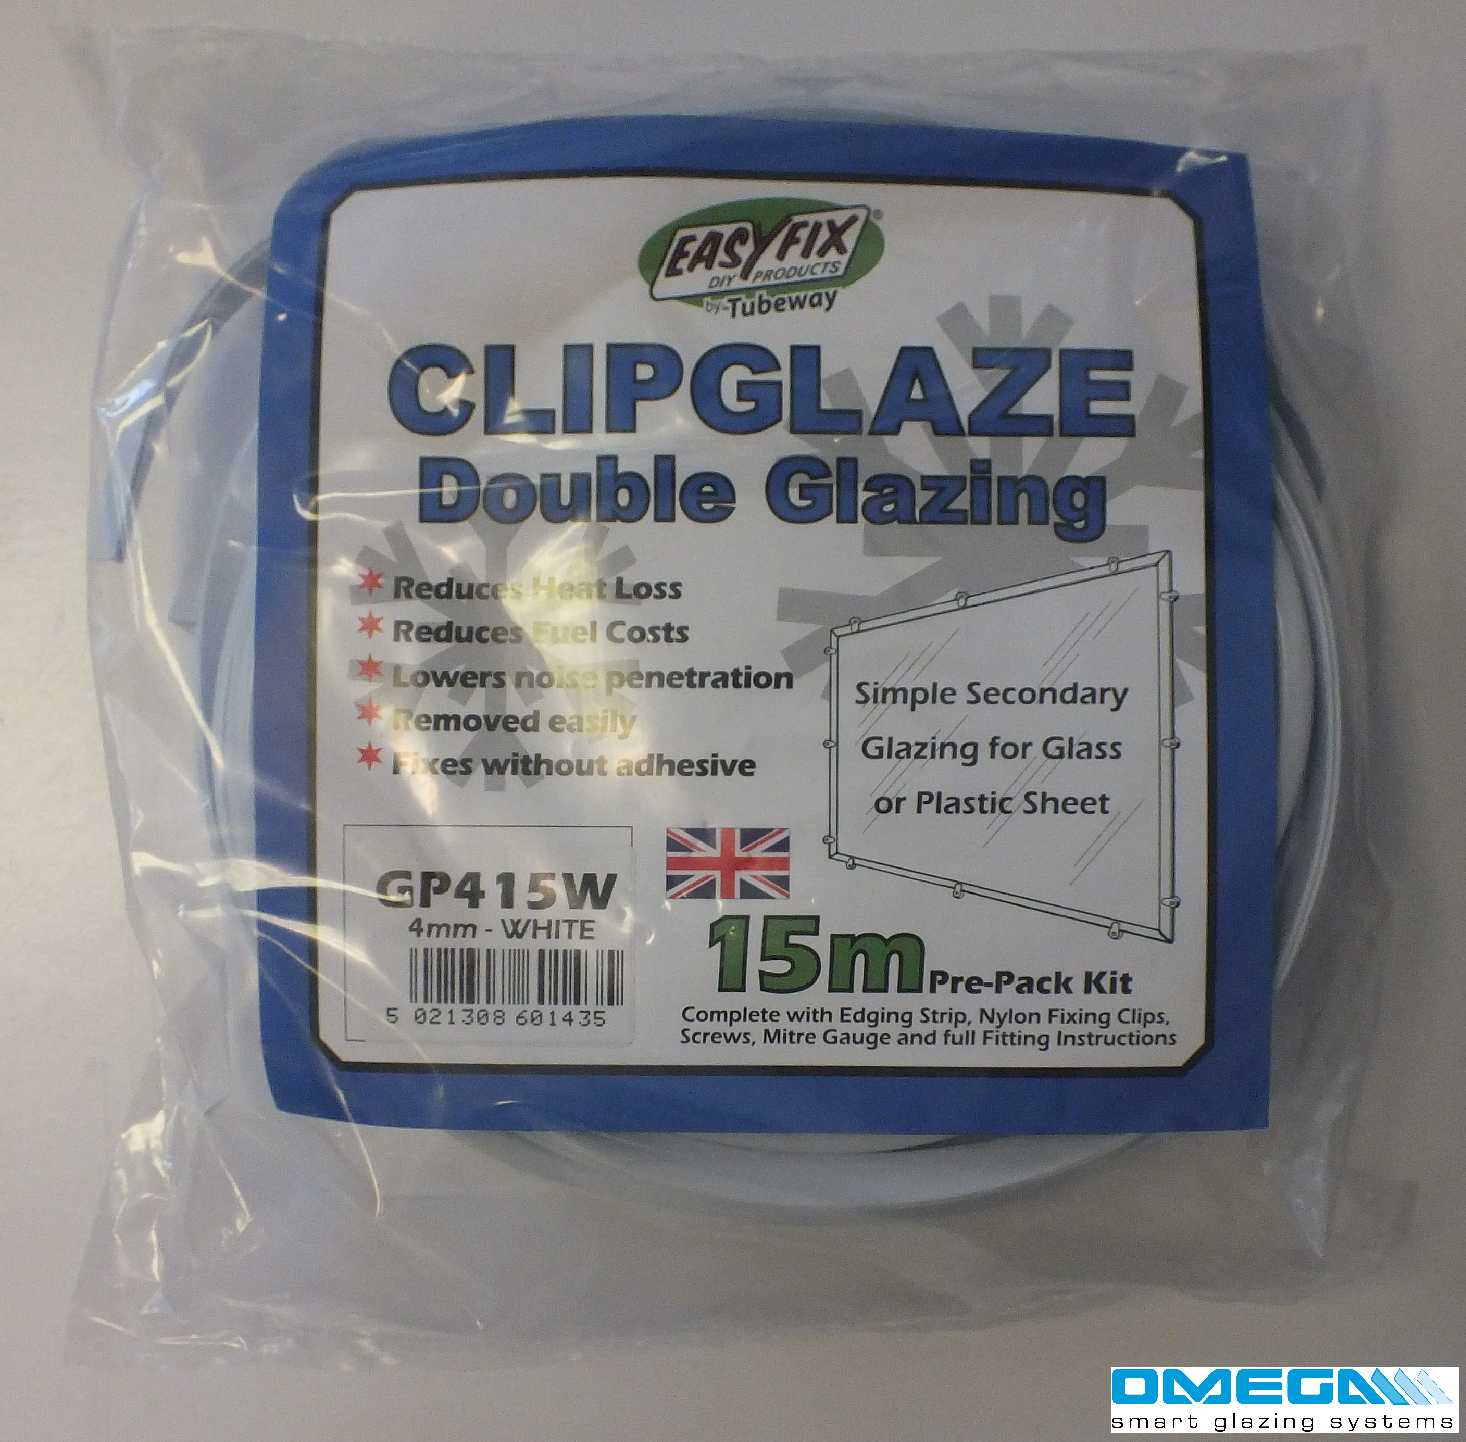 Great deals on Easyfix Clipglaze Edging Kit - 15m roll of edging for 4mm Glazing Thickness, White, Clear or Brown